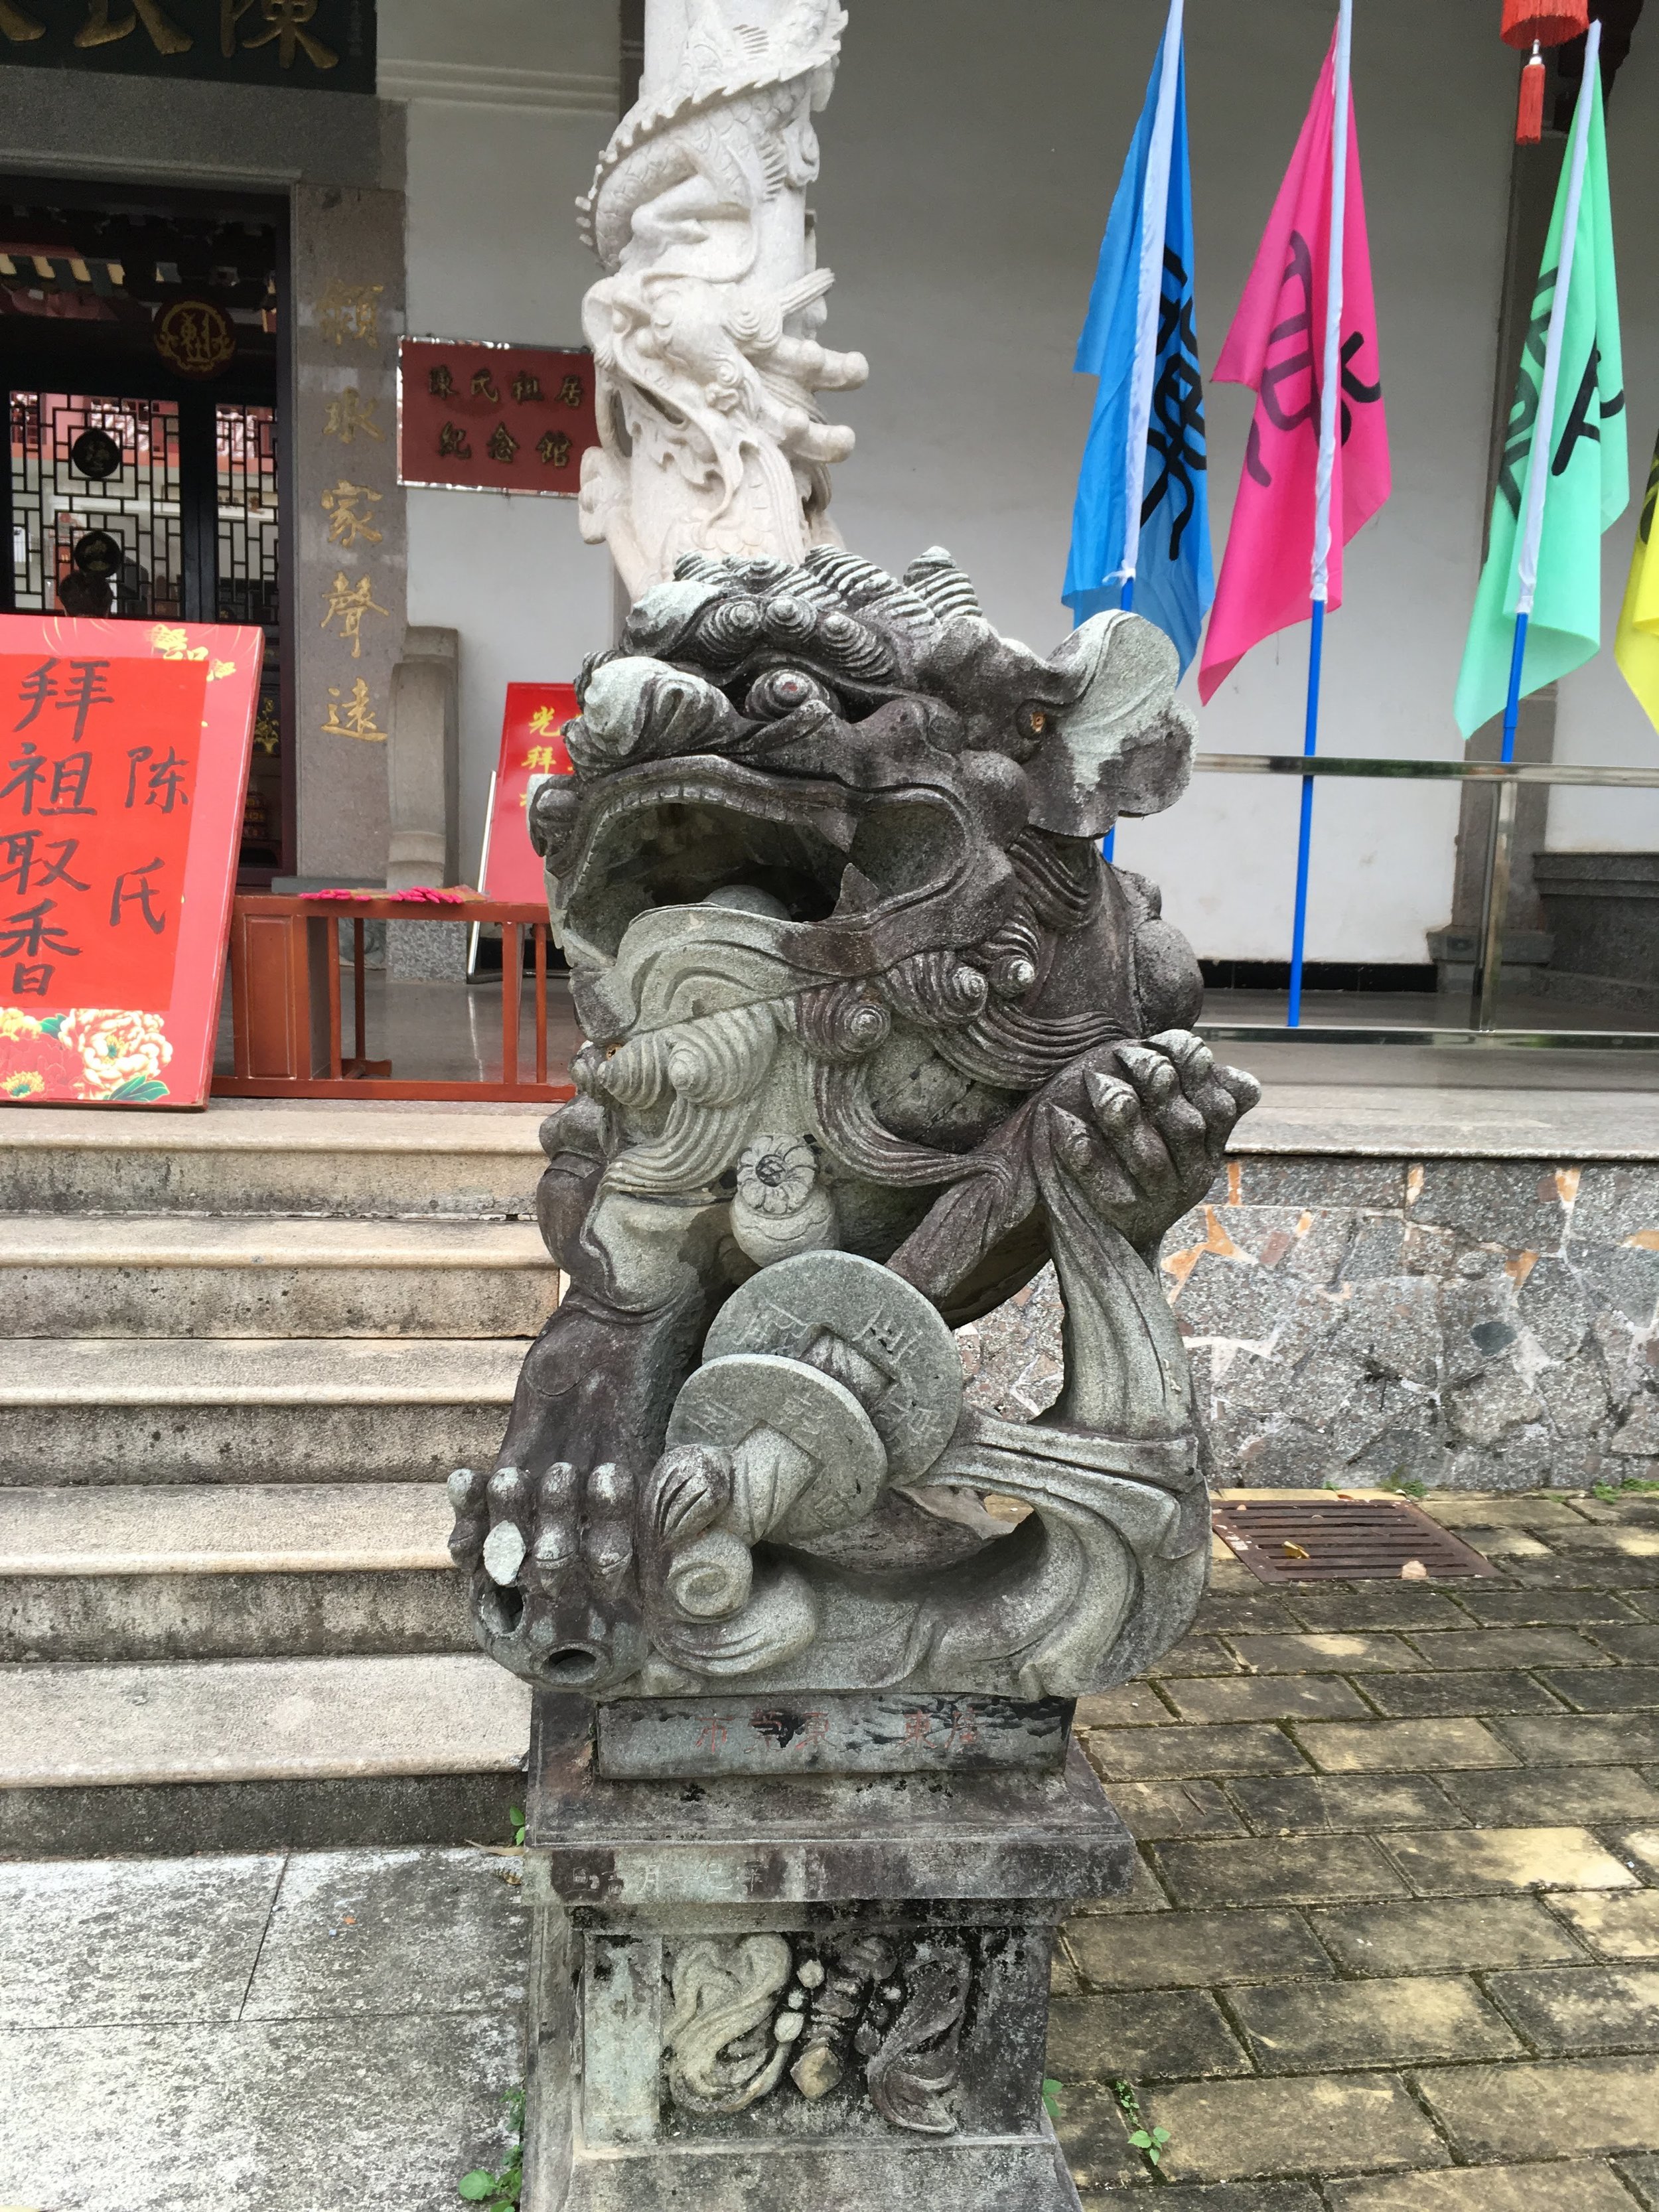 One of the lions outside the entrance to ancestral hall proper.